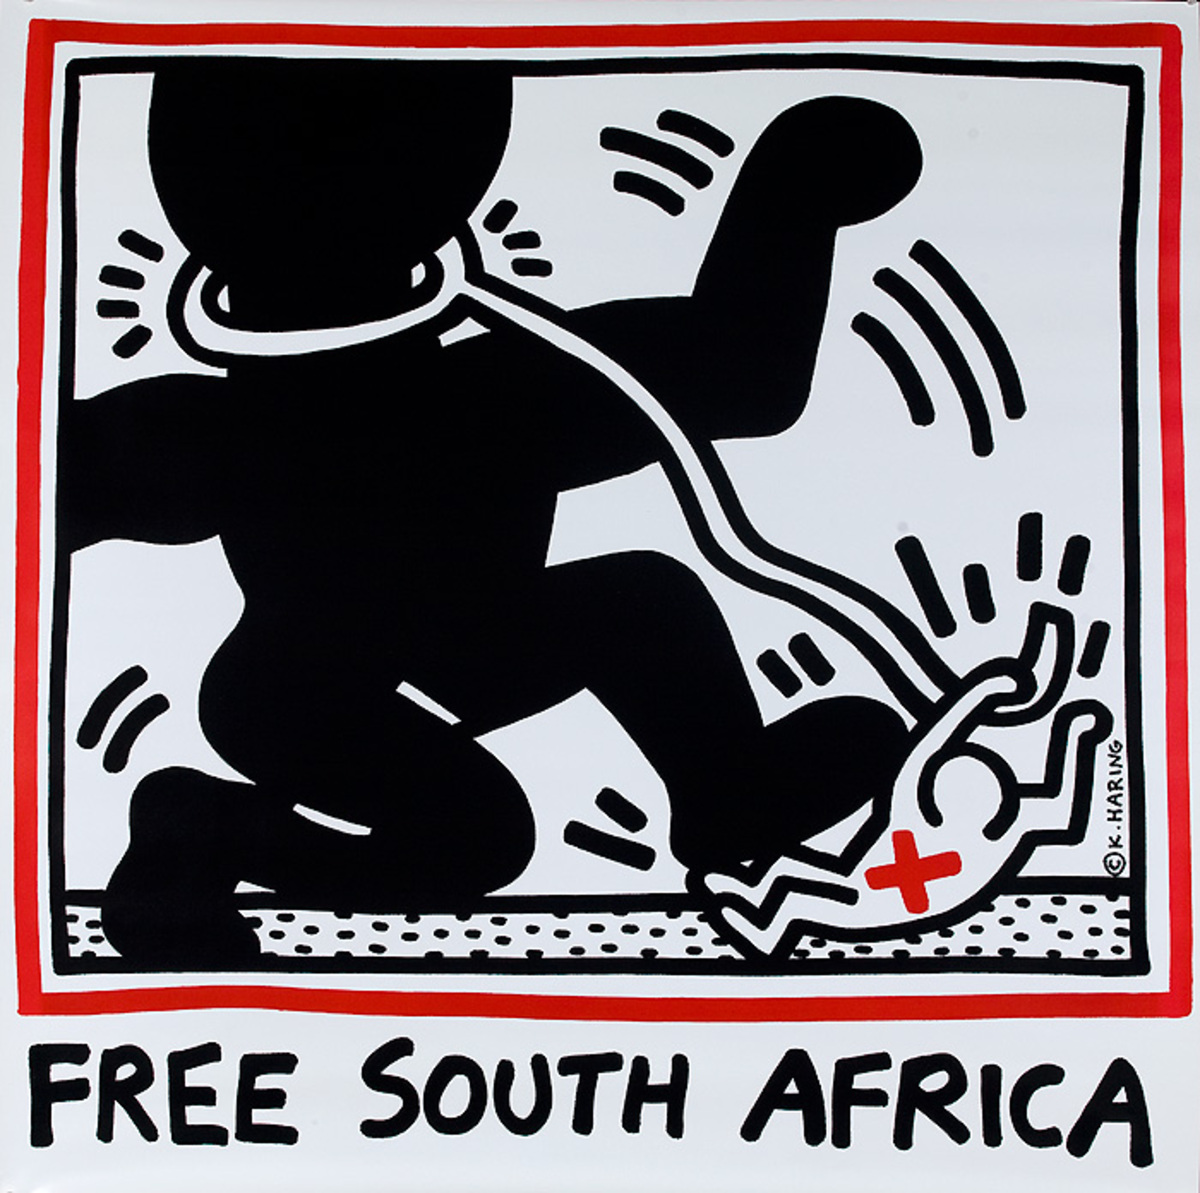 Free South Africa Original Protest Poster